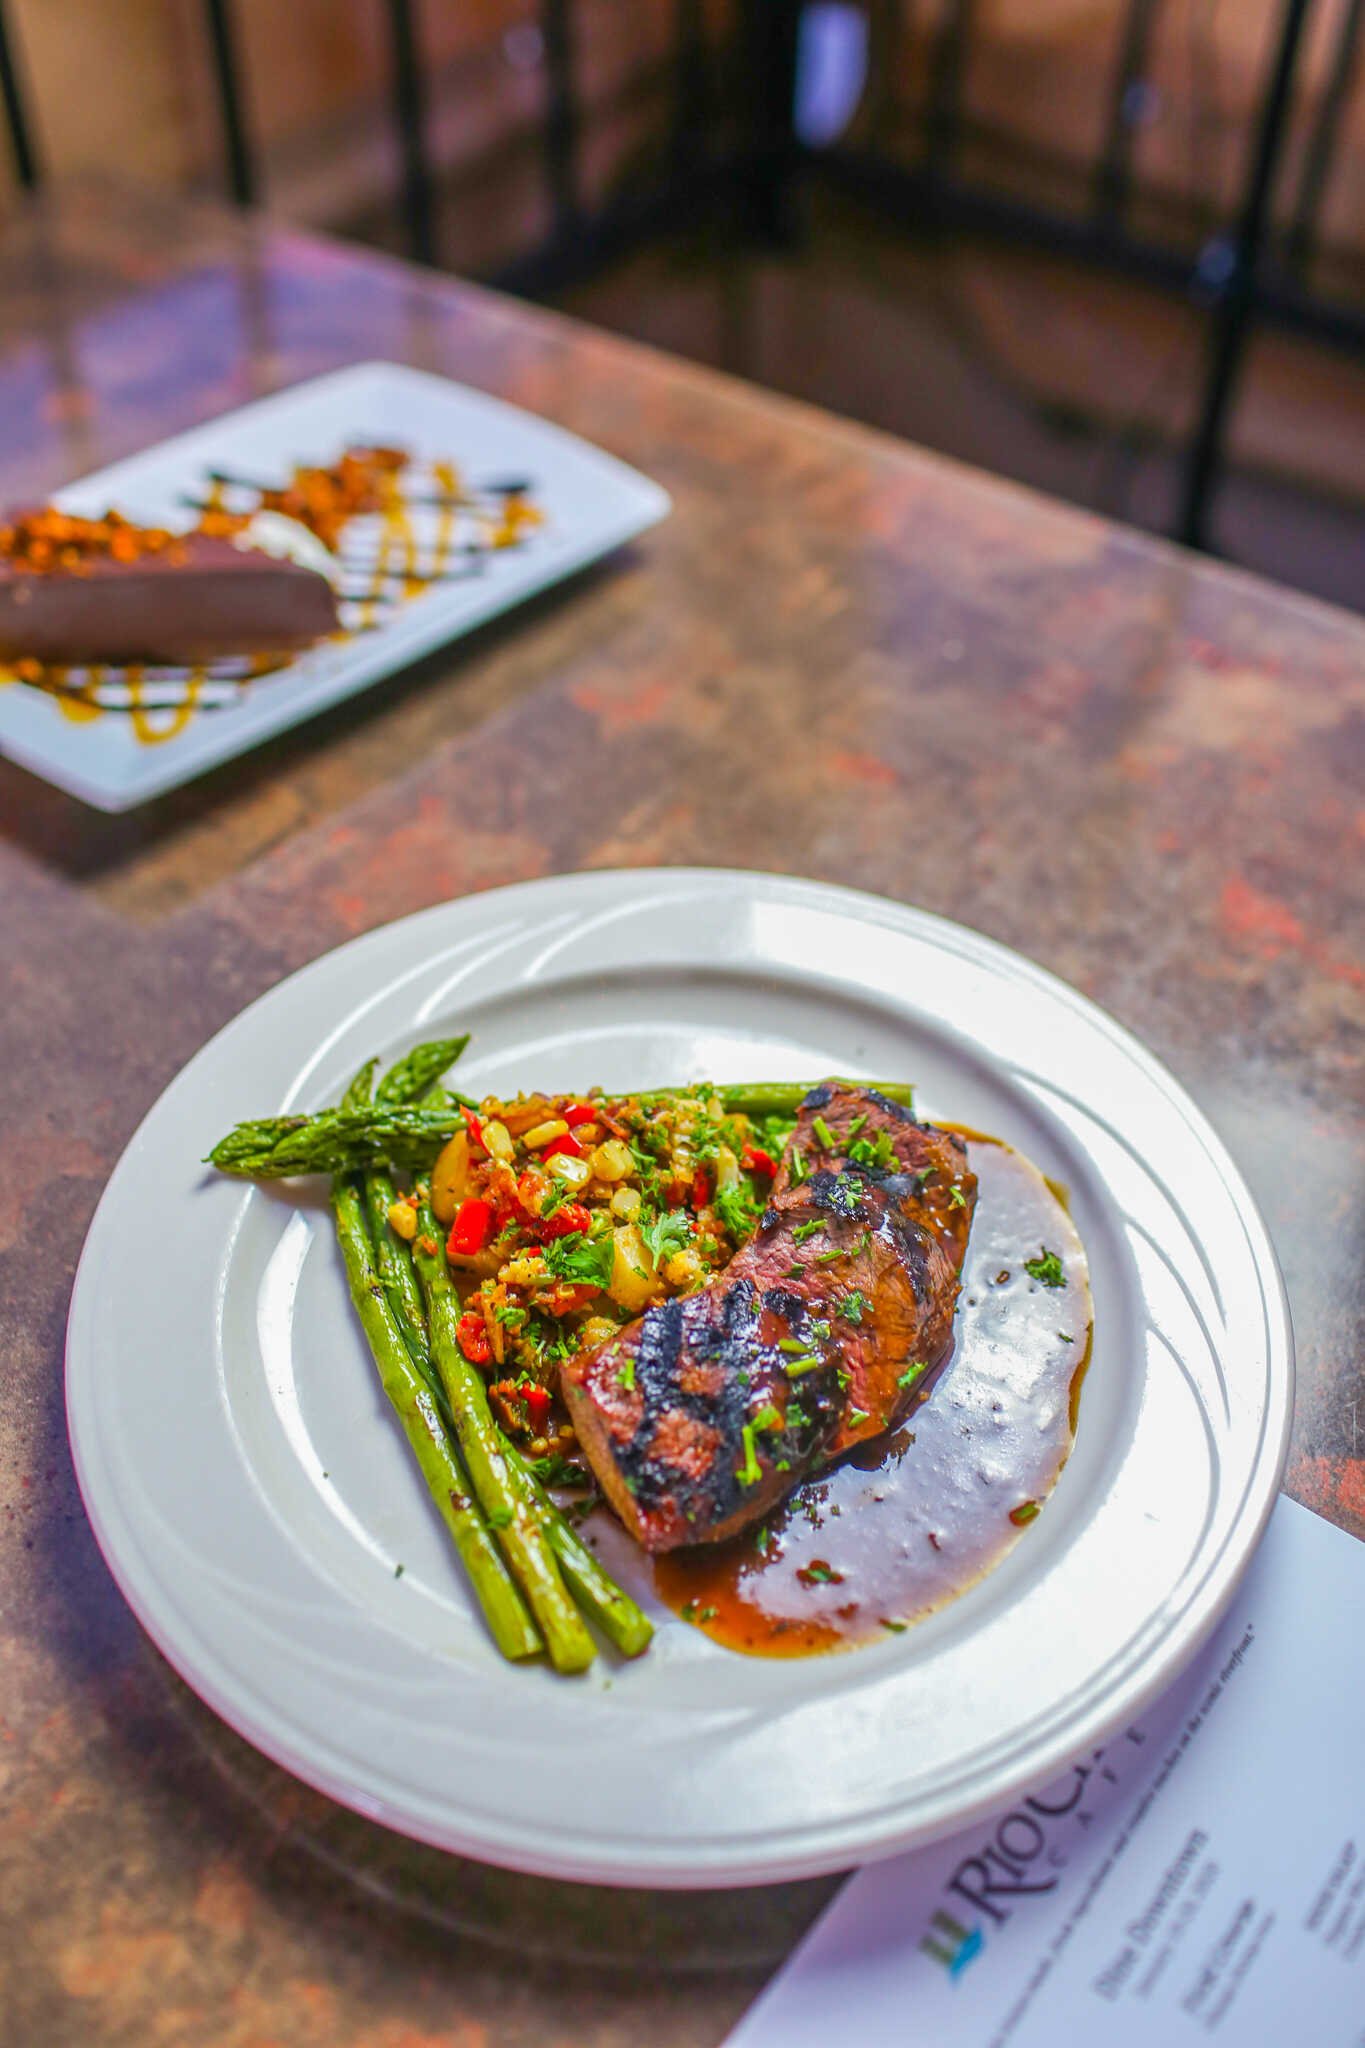 Visitor’s Guide to Old Sacramento - Dinner entrees from Rio City Cafe in Old Sacramento.